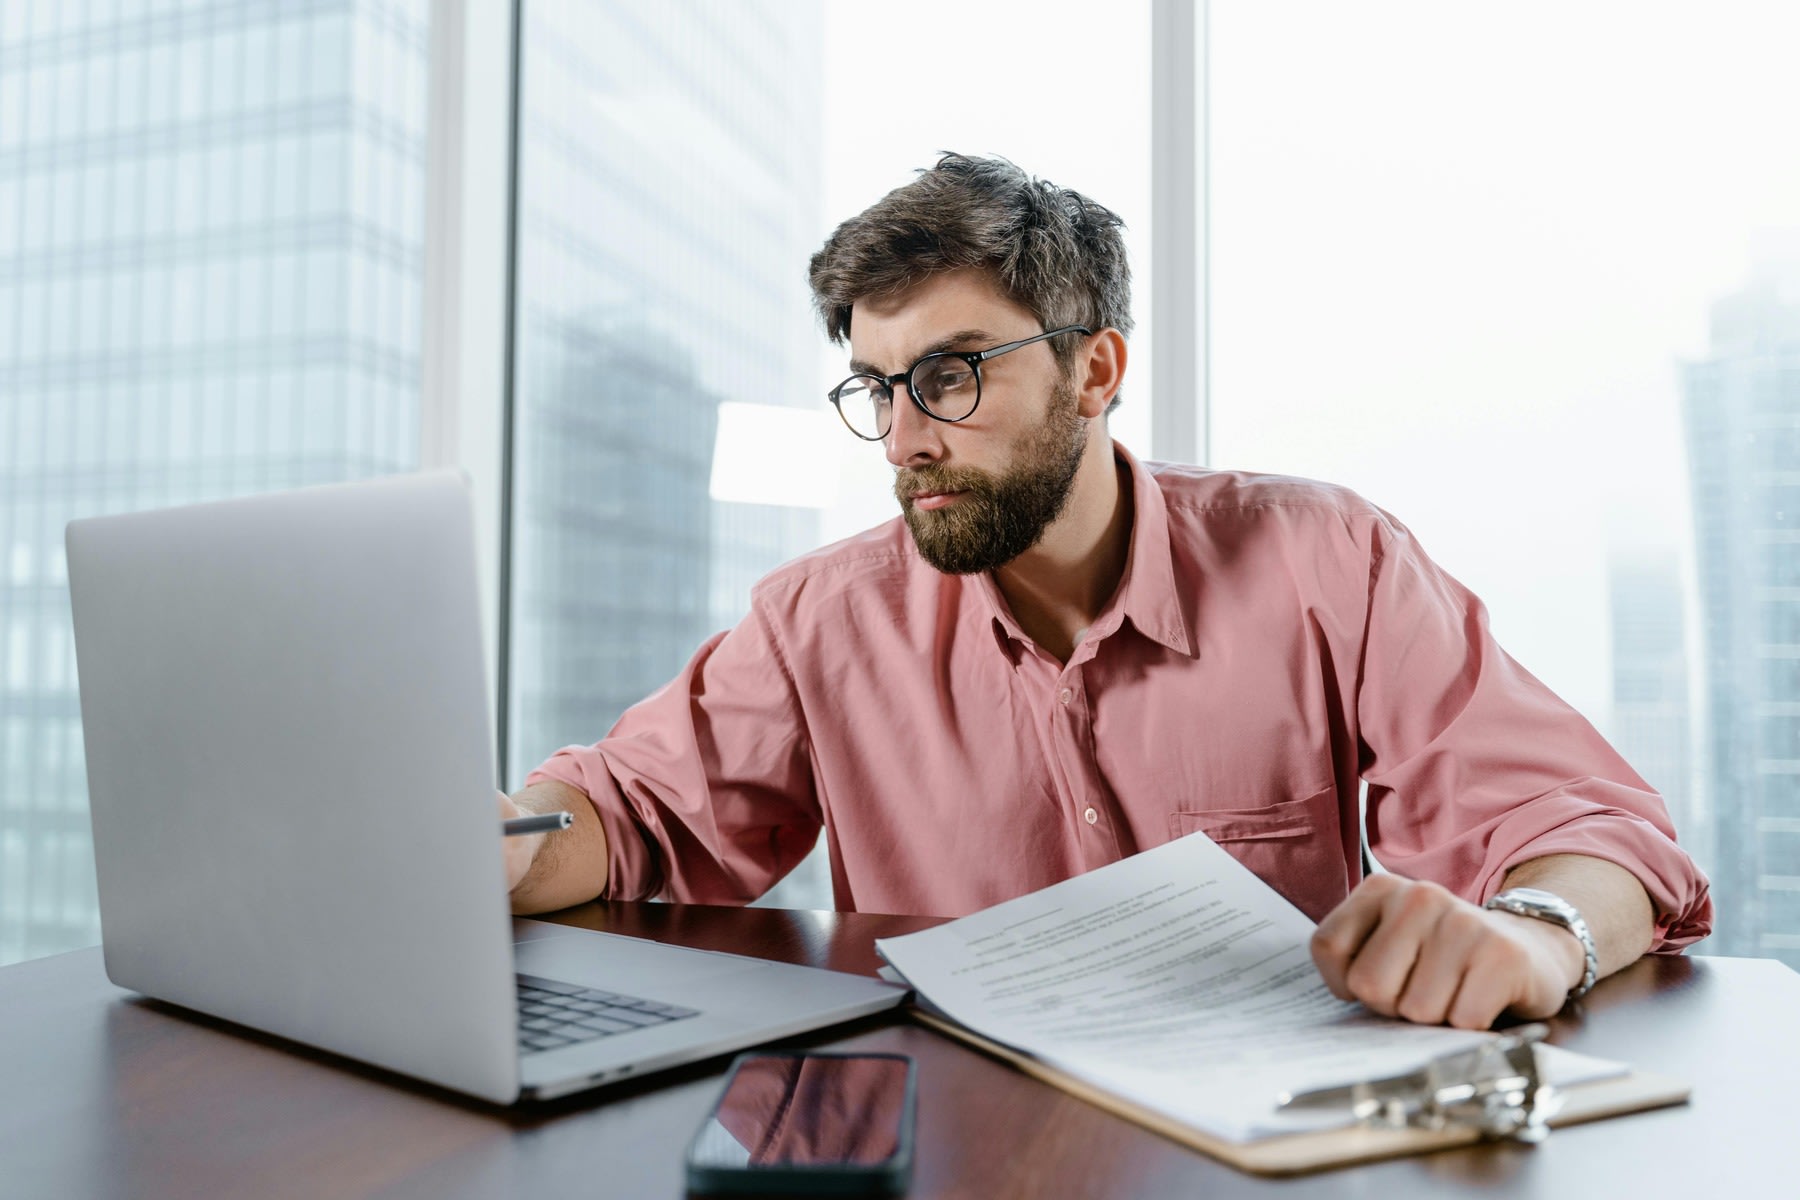 Man looking at his laptop while reviewing printed reports on a clipboard